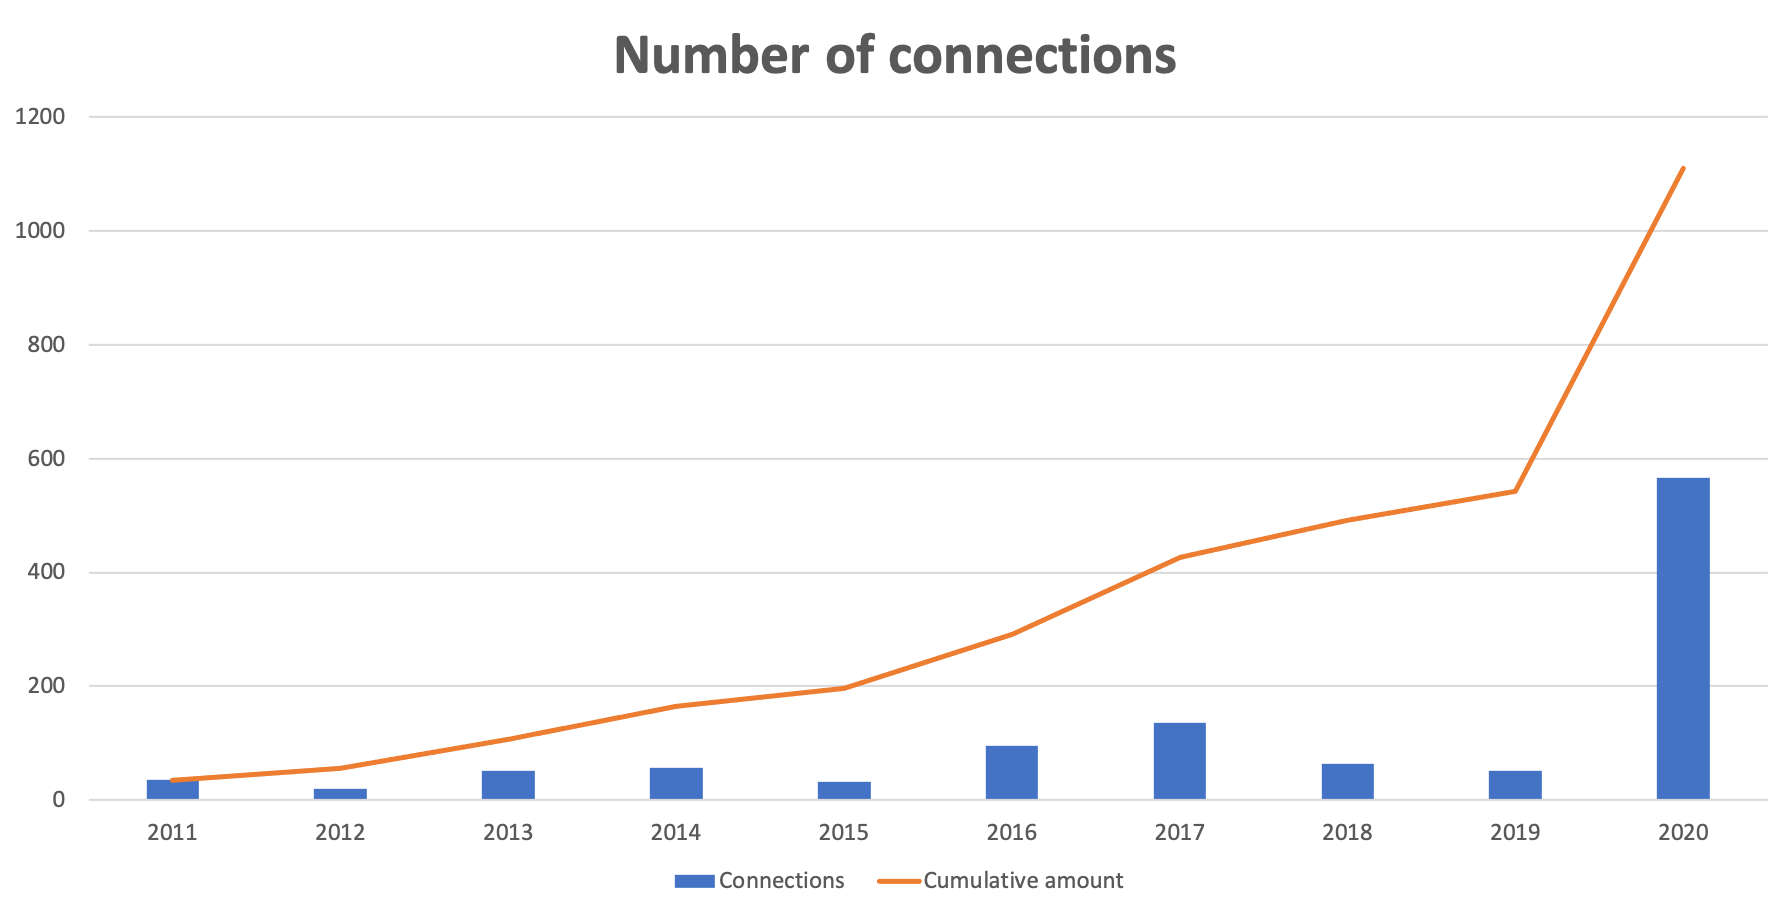 LinkedIn connections from 2011 to 2020